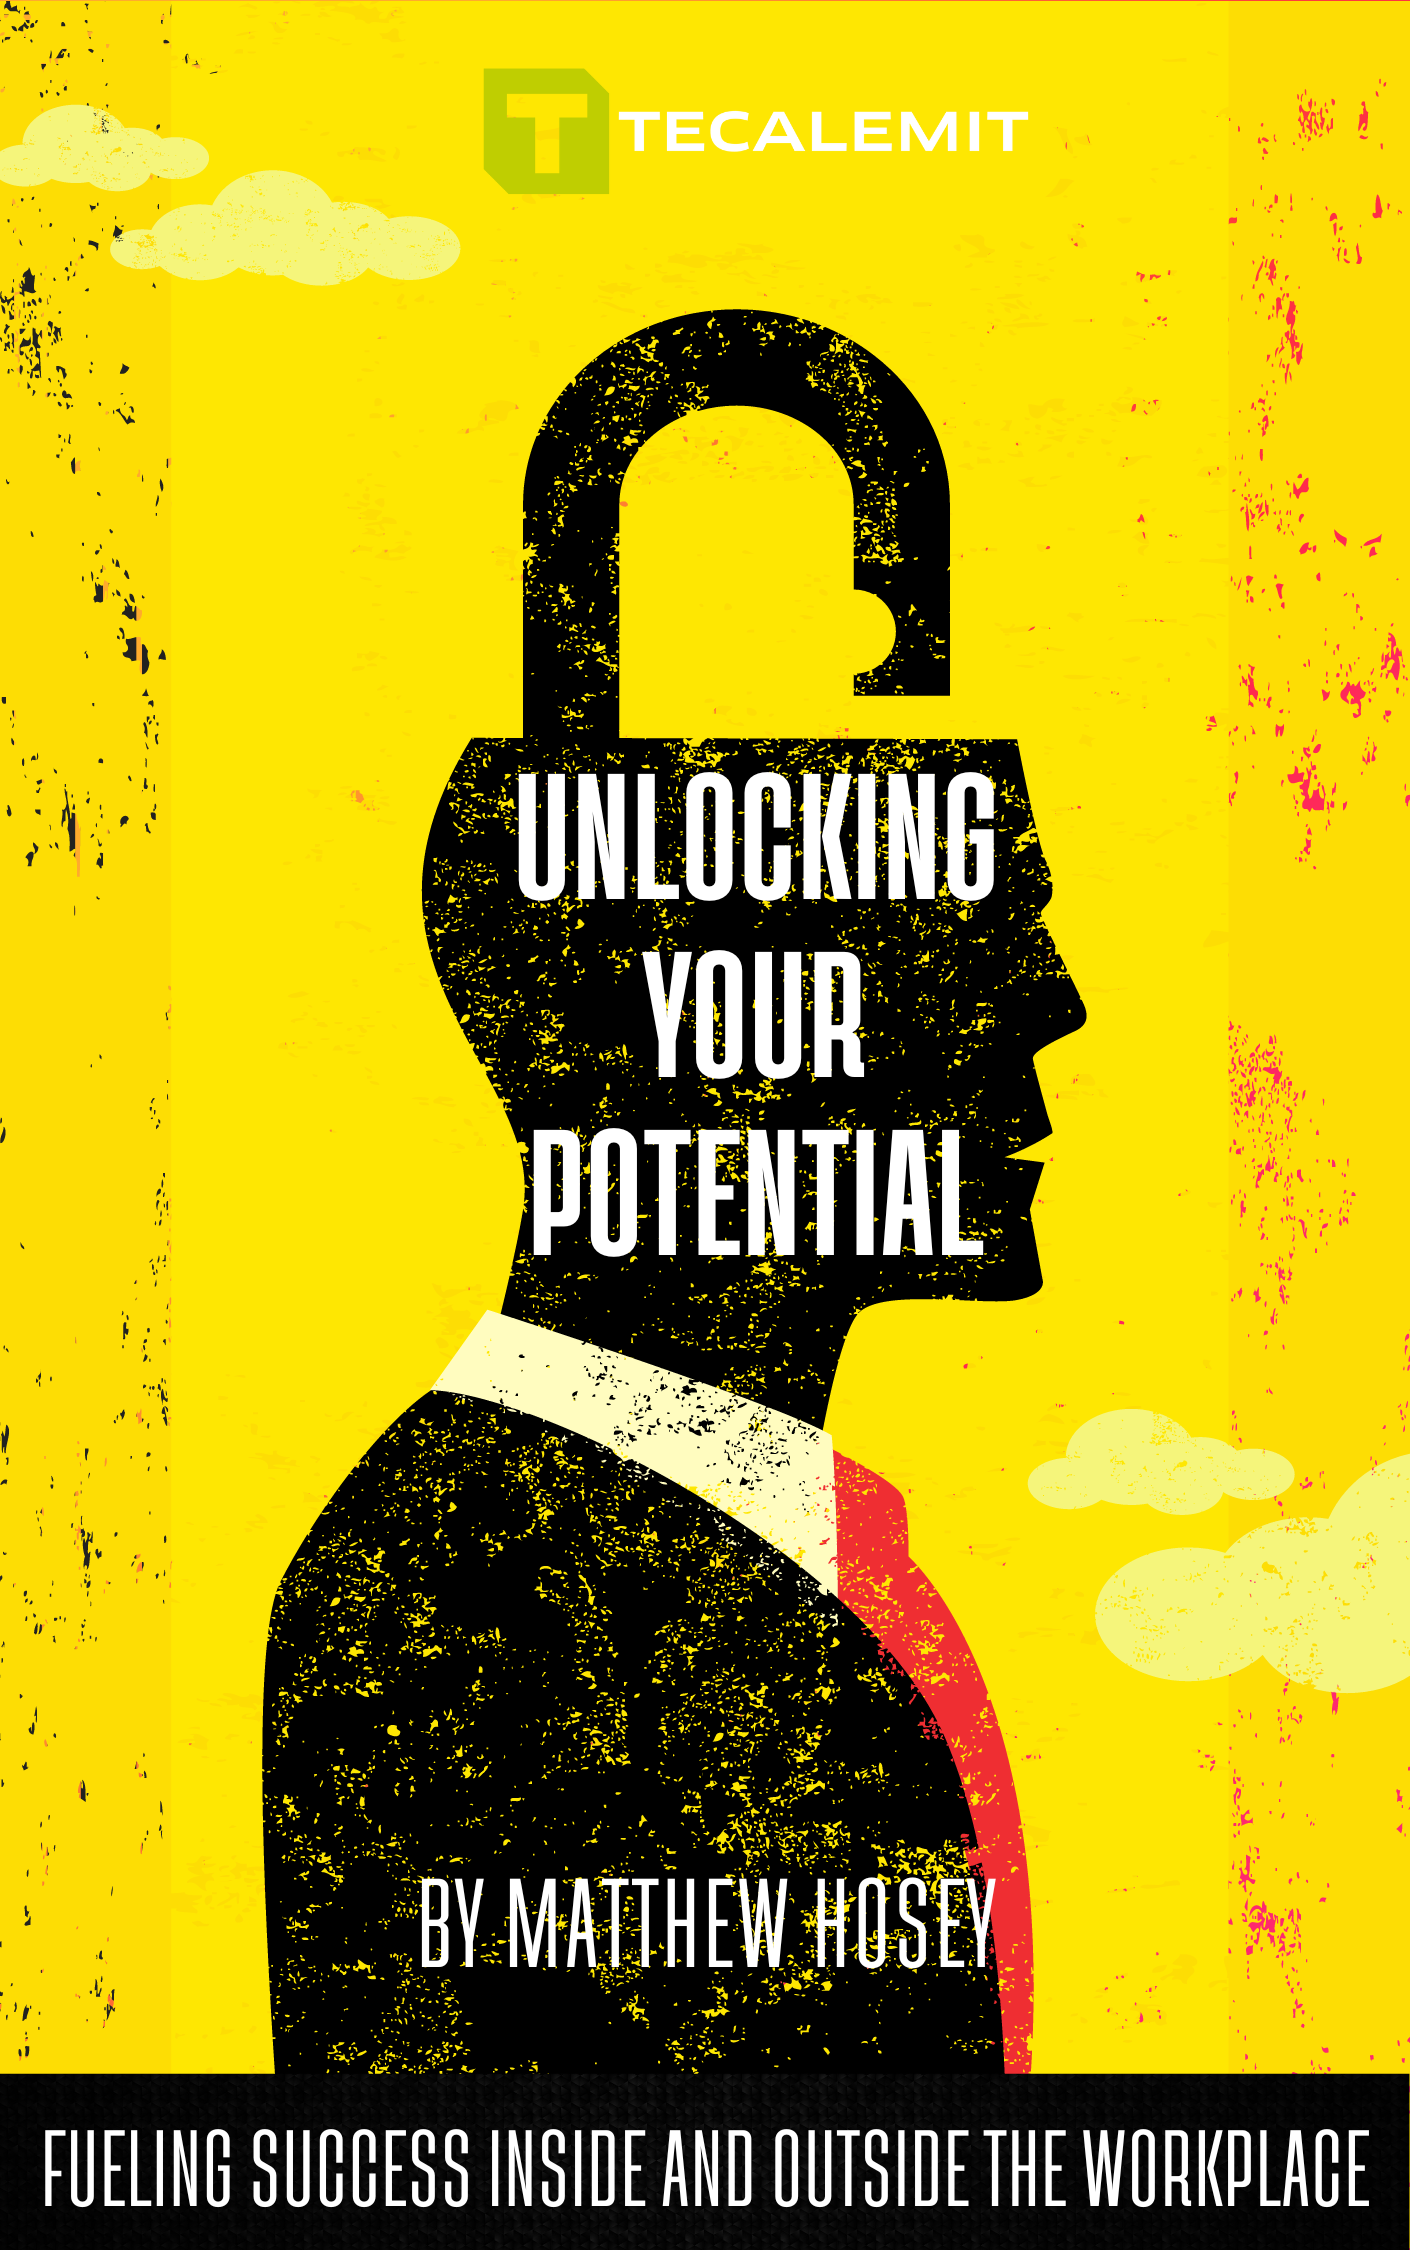 Unlock Your Potential: Fueling Success Inside and Outside the Workplace, Tecalemit, Matthew Hosey, motivation, success, fuel management,